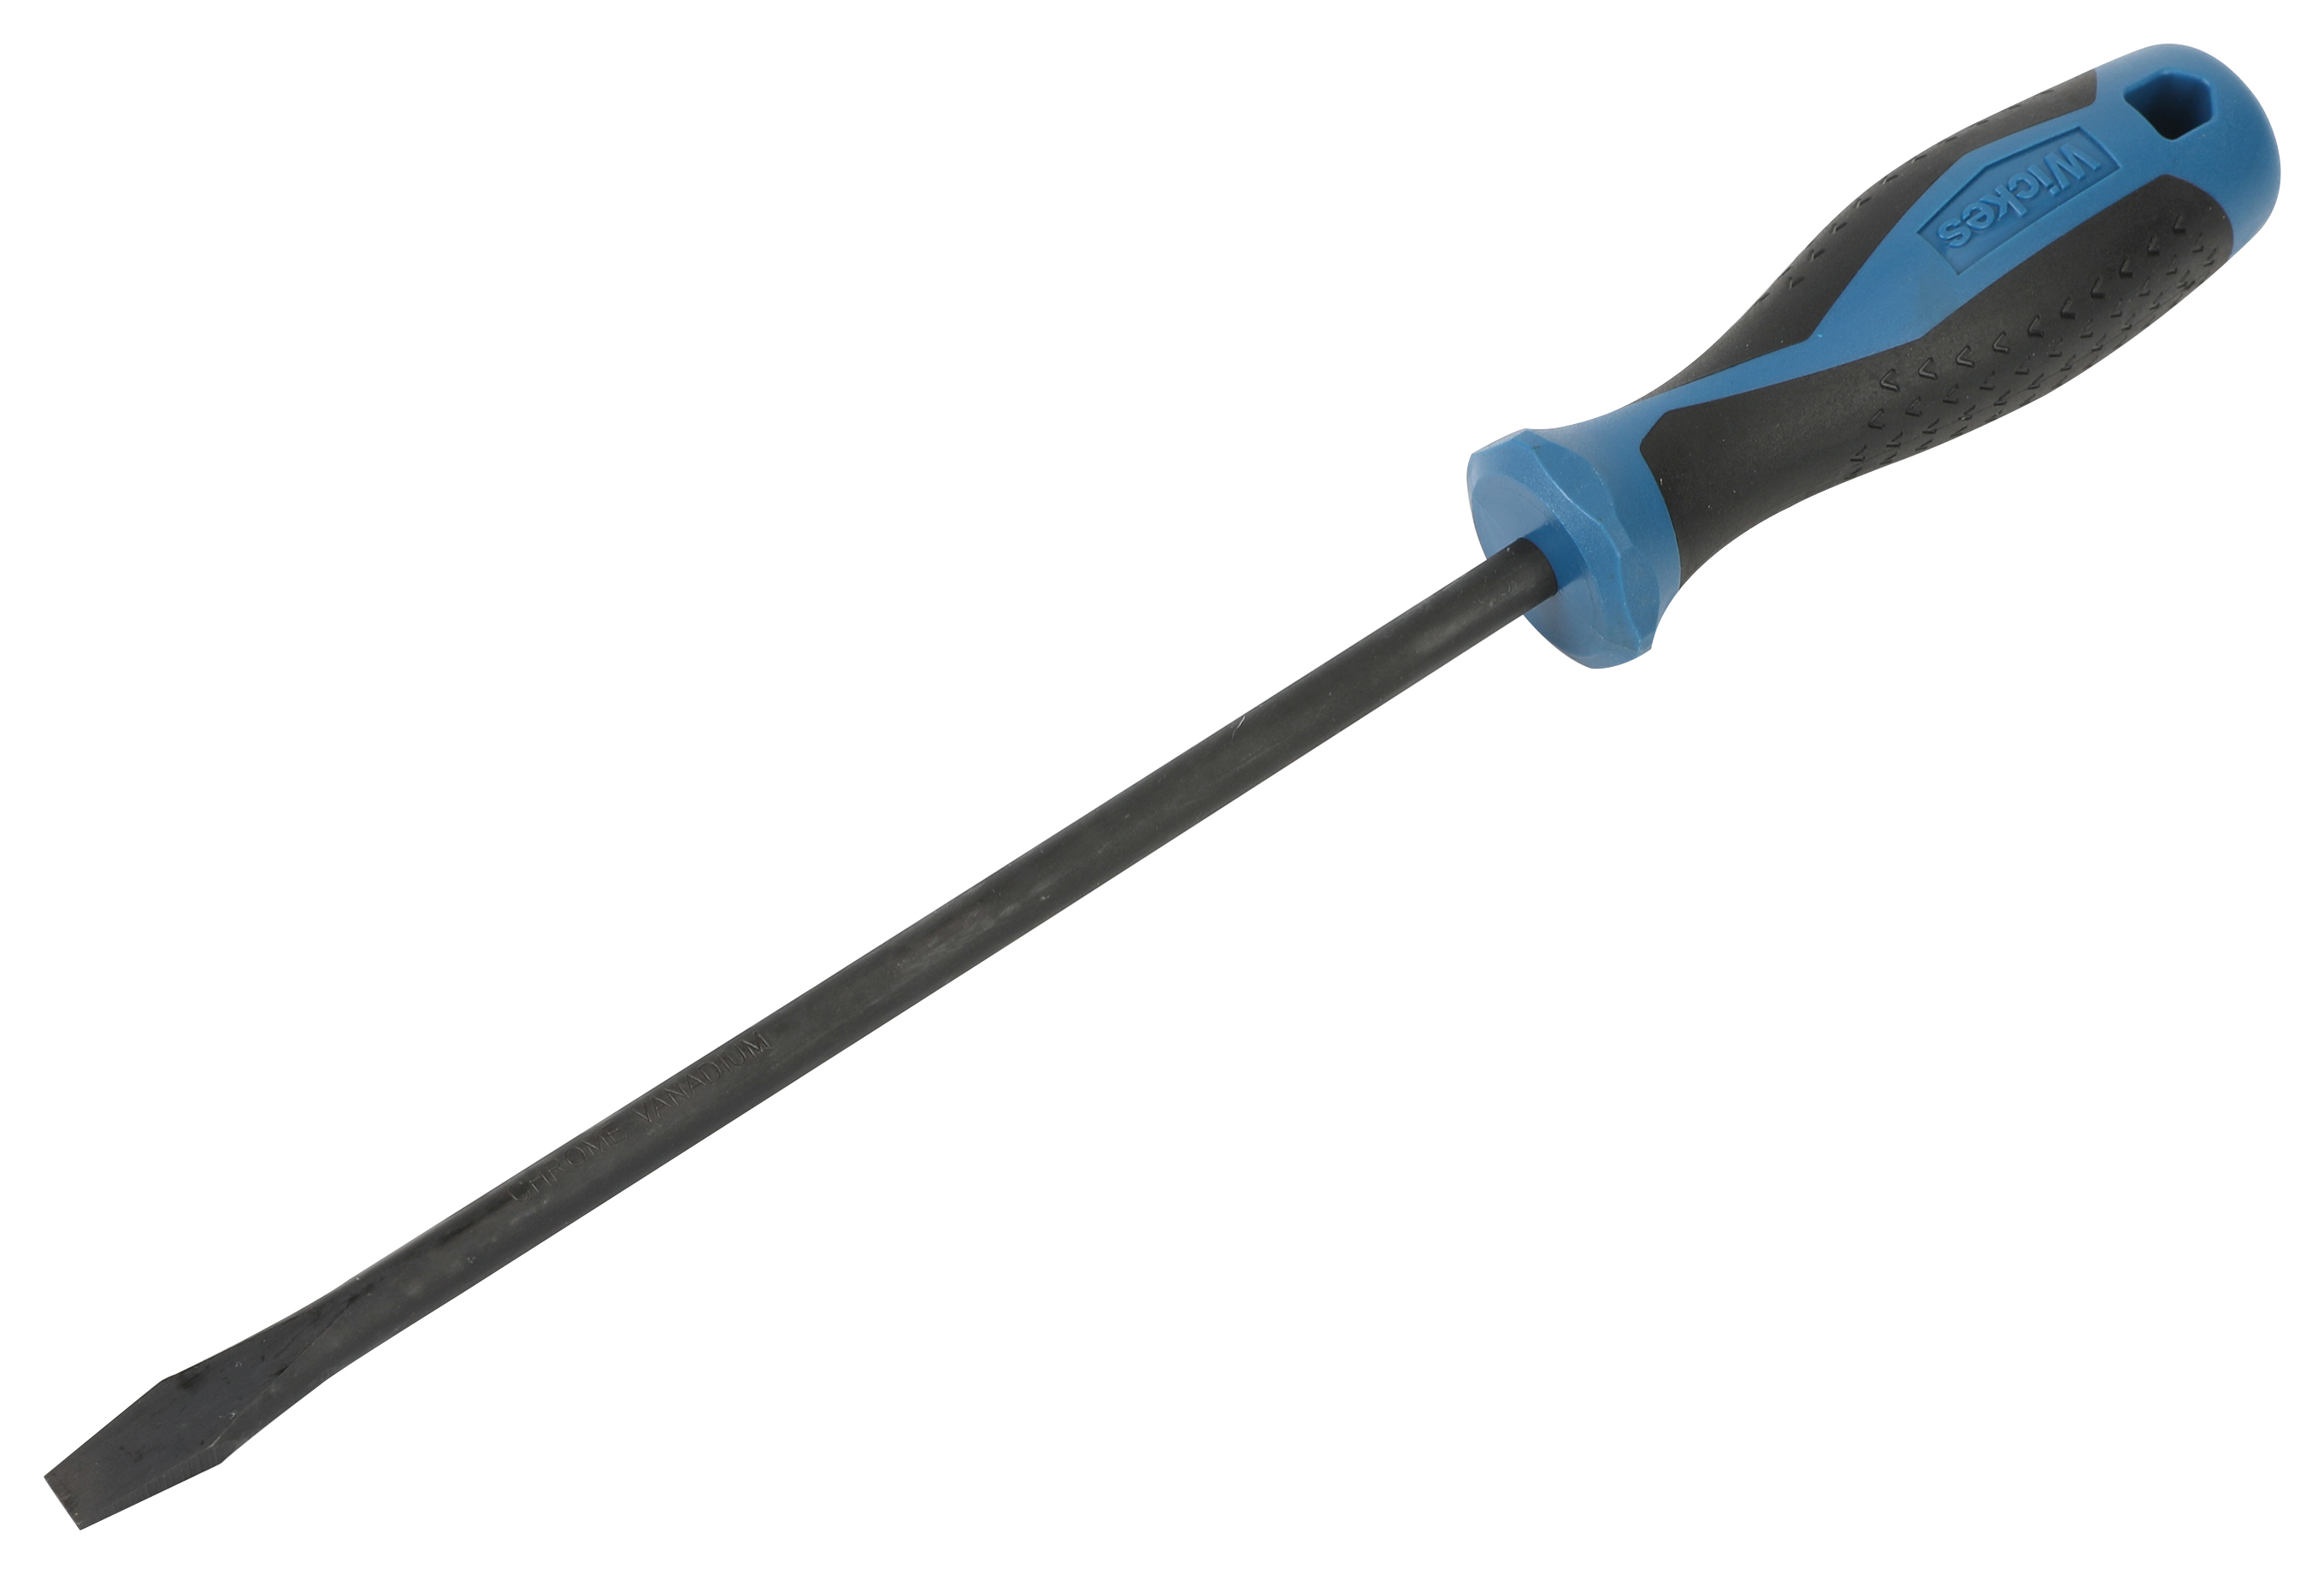 Wickes 8mm Soft Grip Slotted Screwdriver - 200mm